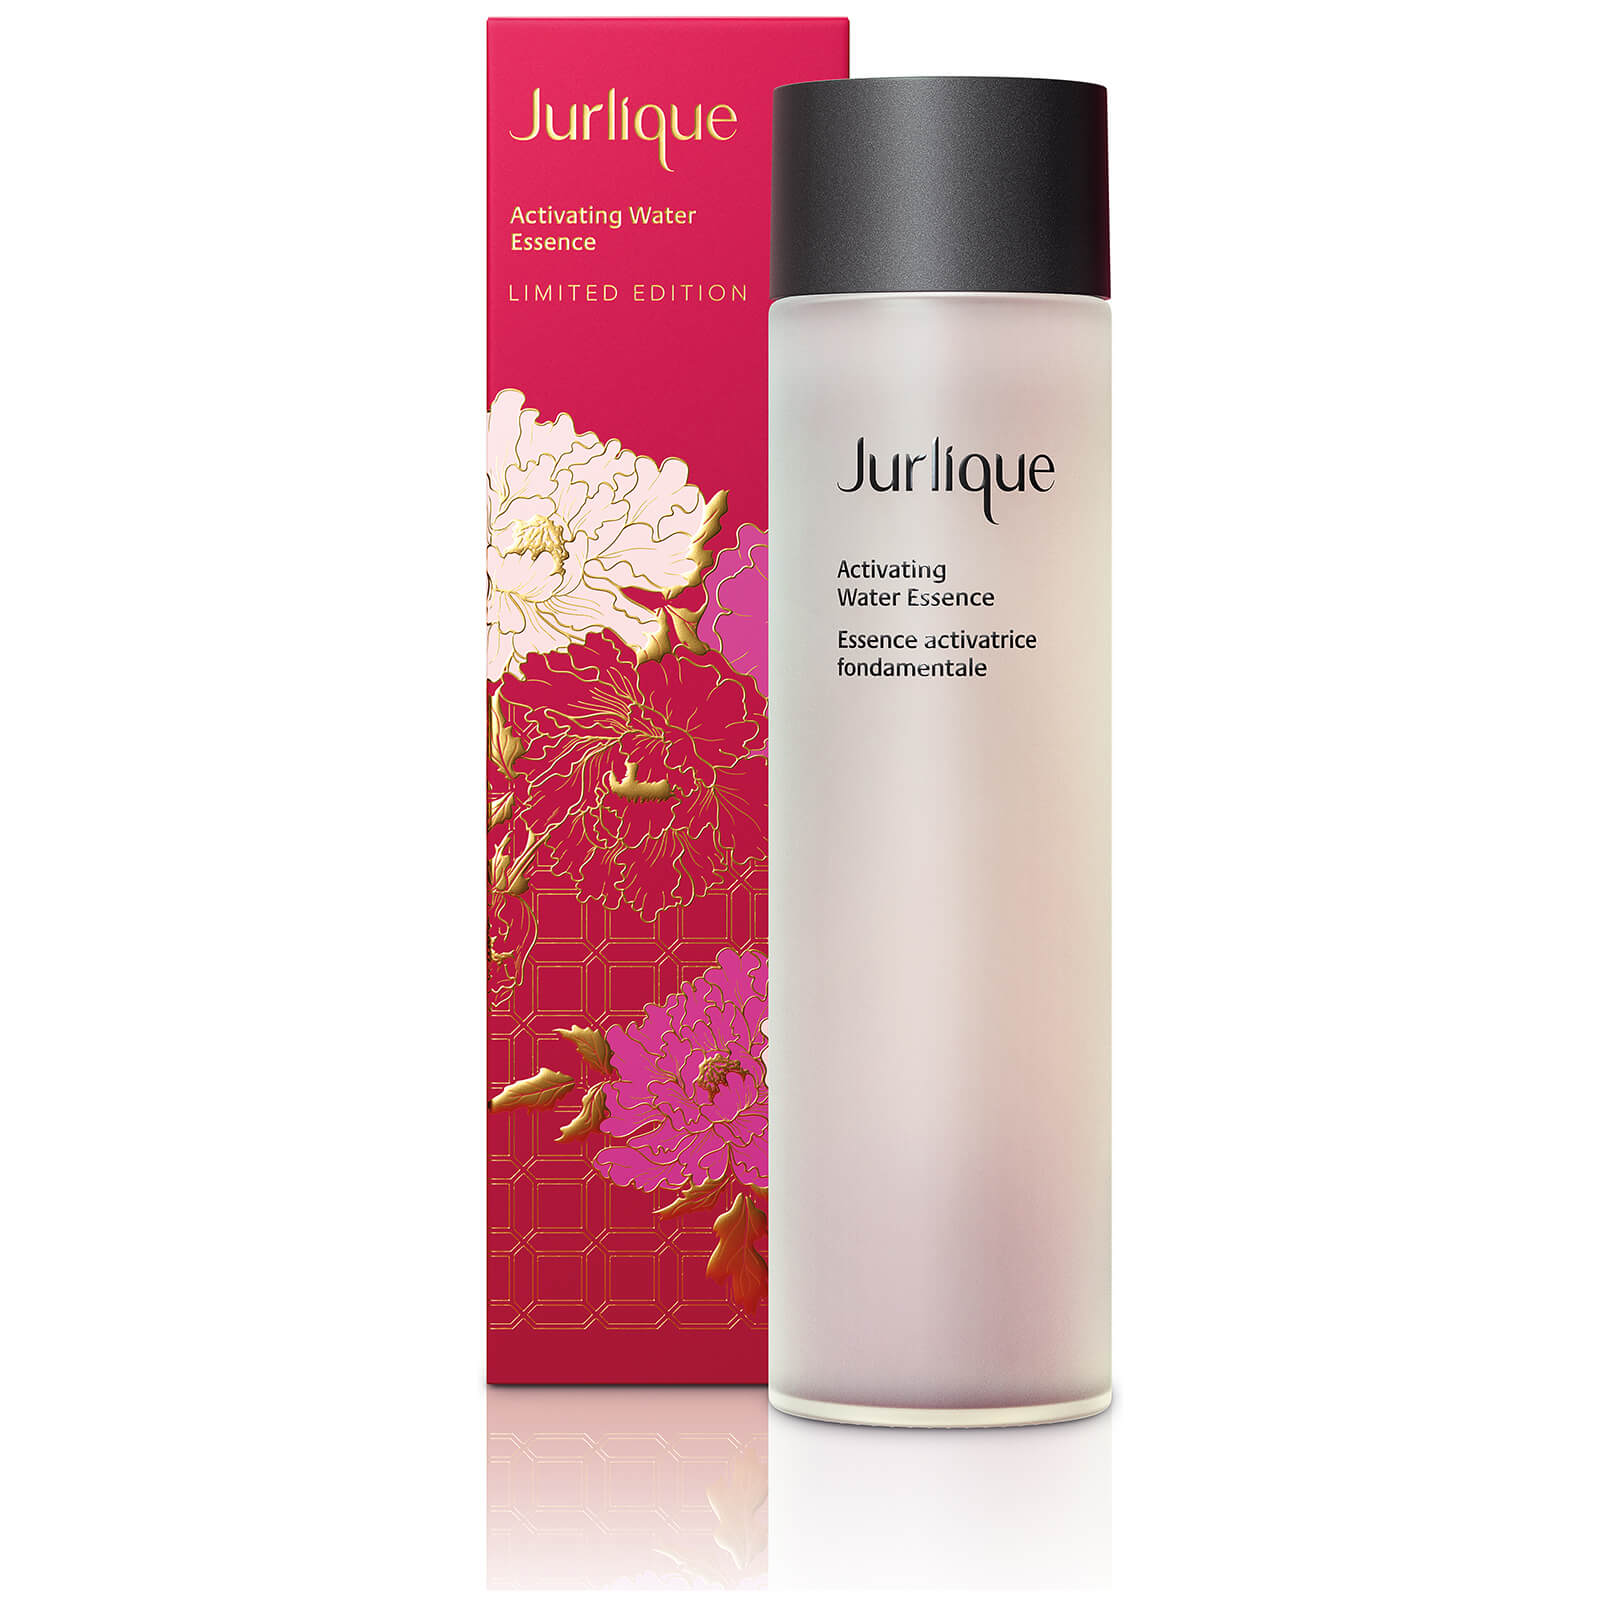 Jurlique Exclusive Activating Water Essence Limited Edition